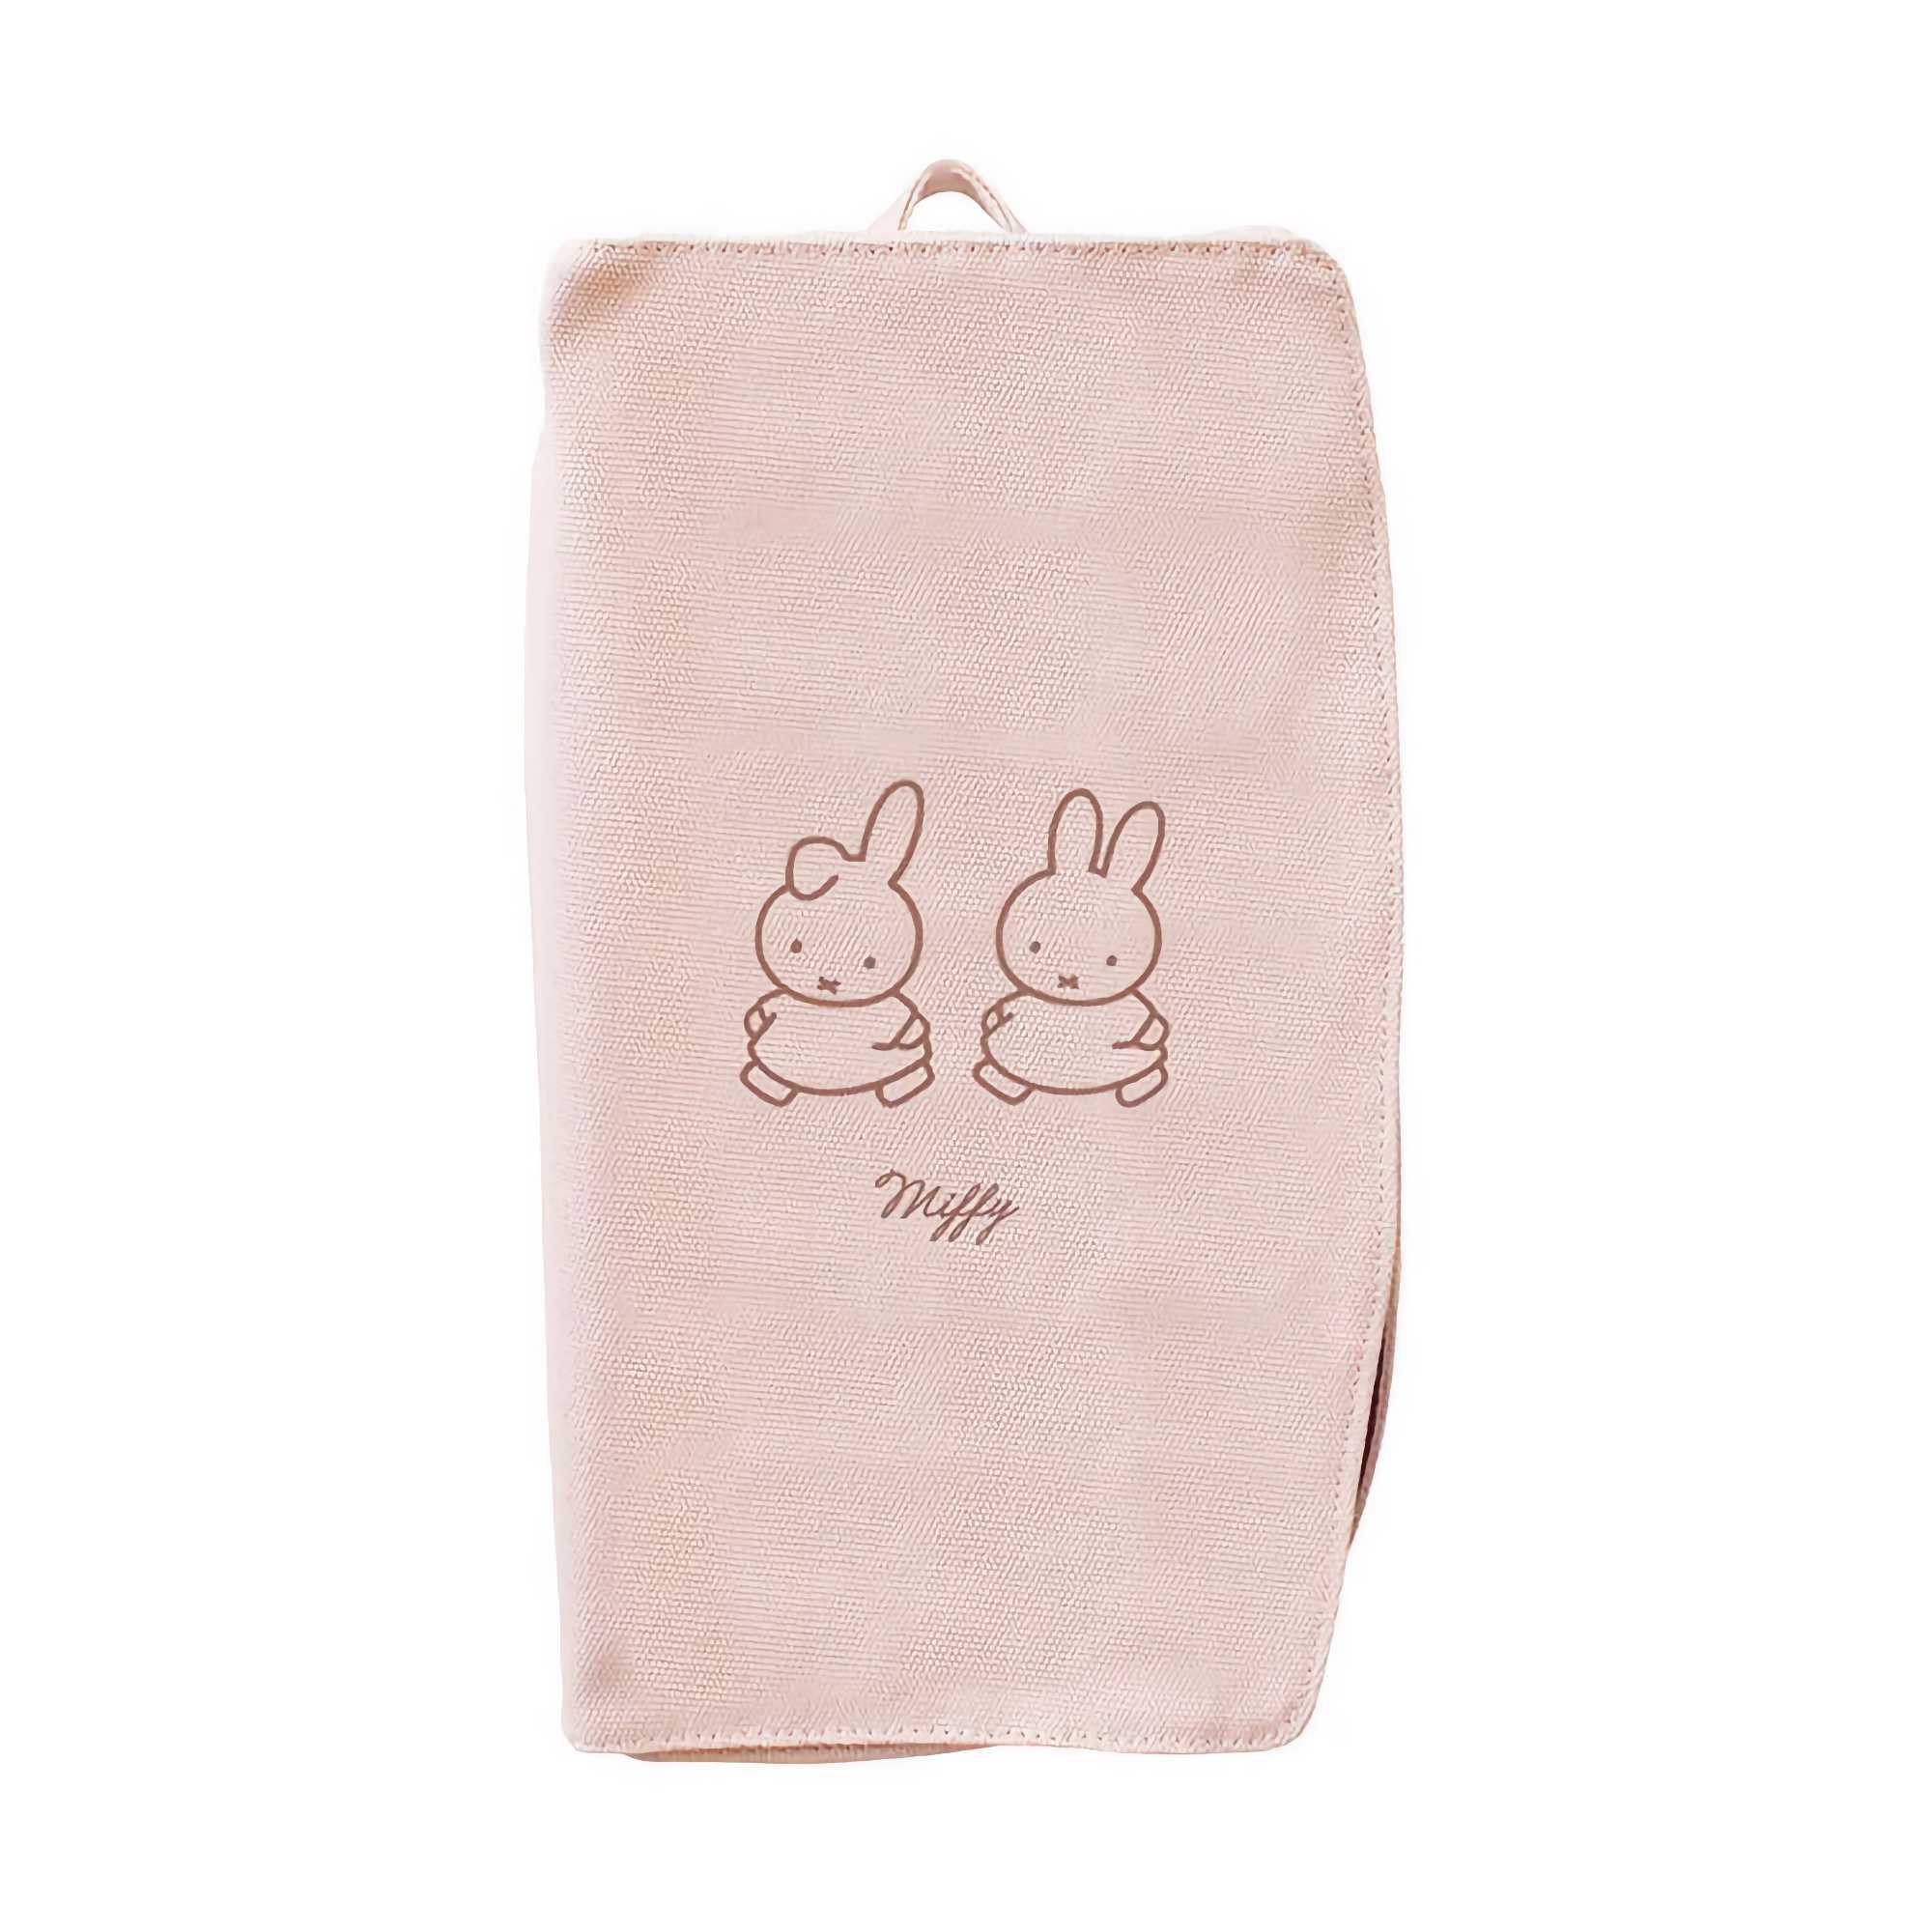 Miffy Tissue Box Cover, Pink